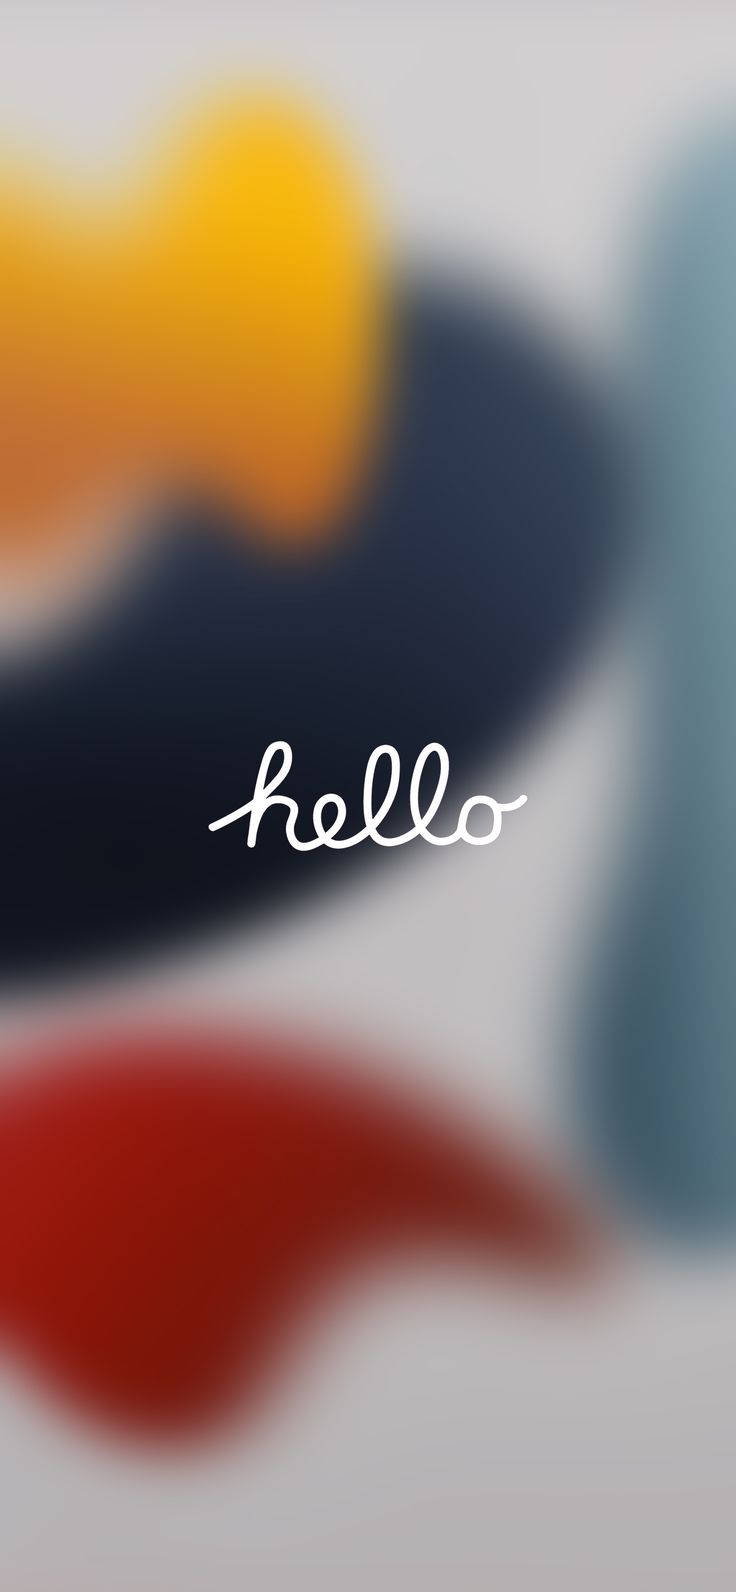 Famous Hello Greeting Of Iphone Wallpaper